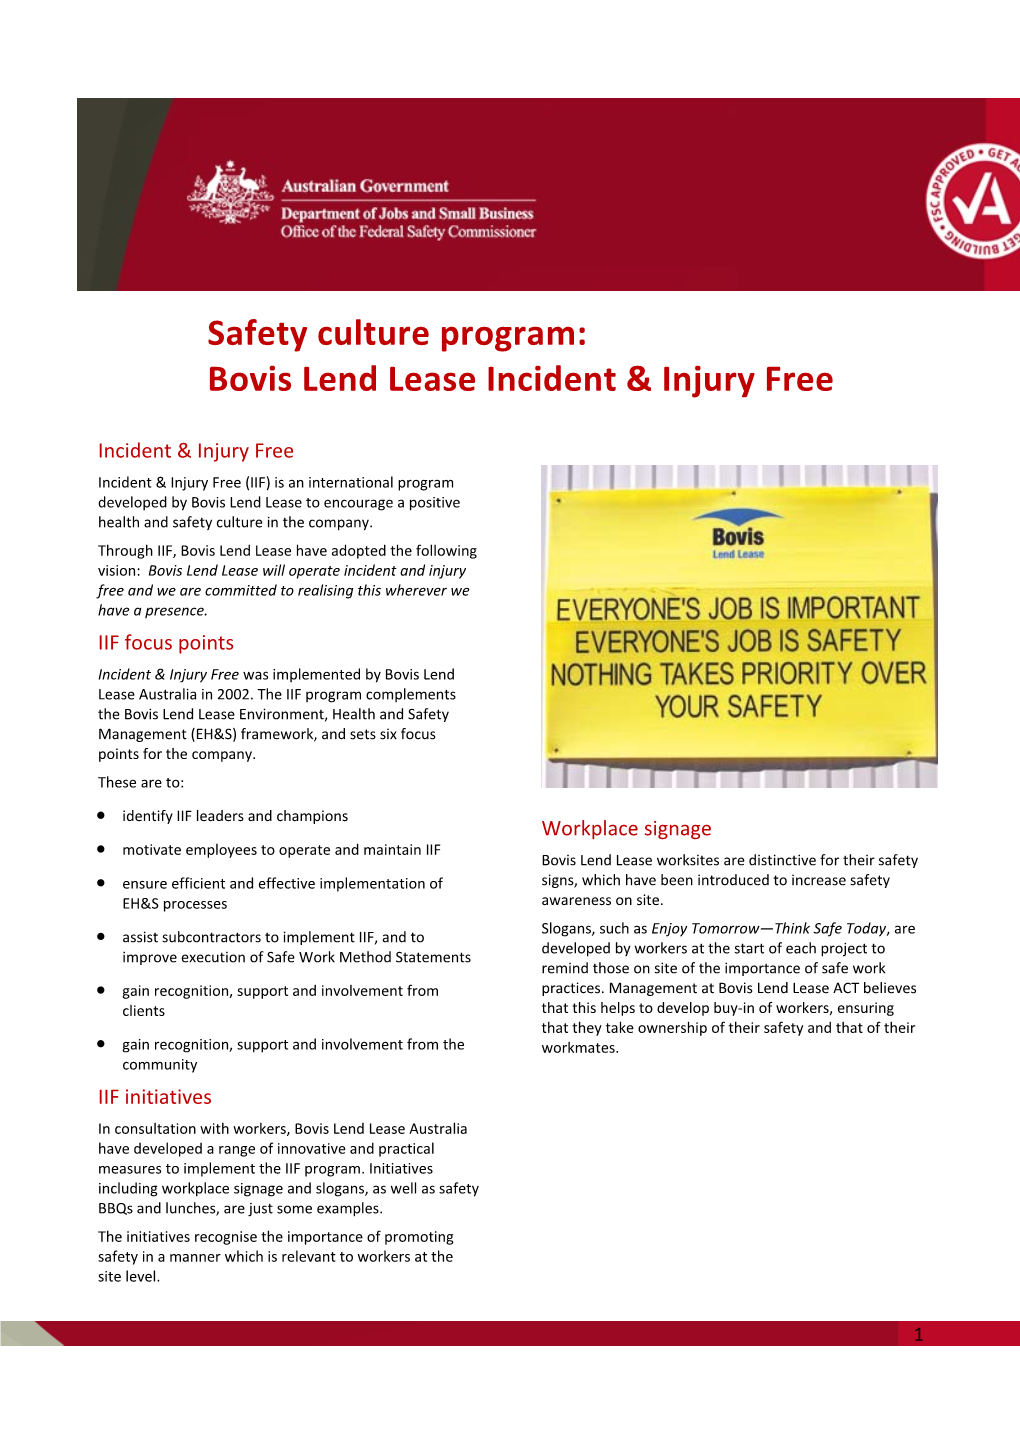 Safety Culture Program: Bovis Lend Lease Incident & Injury Free